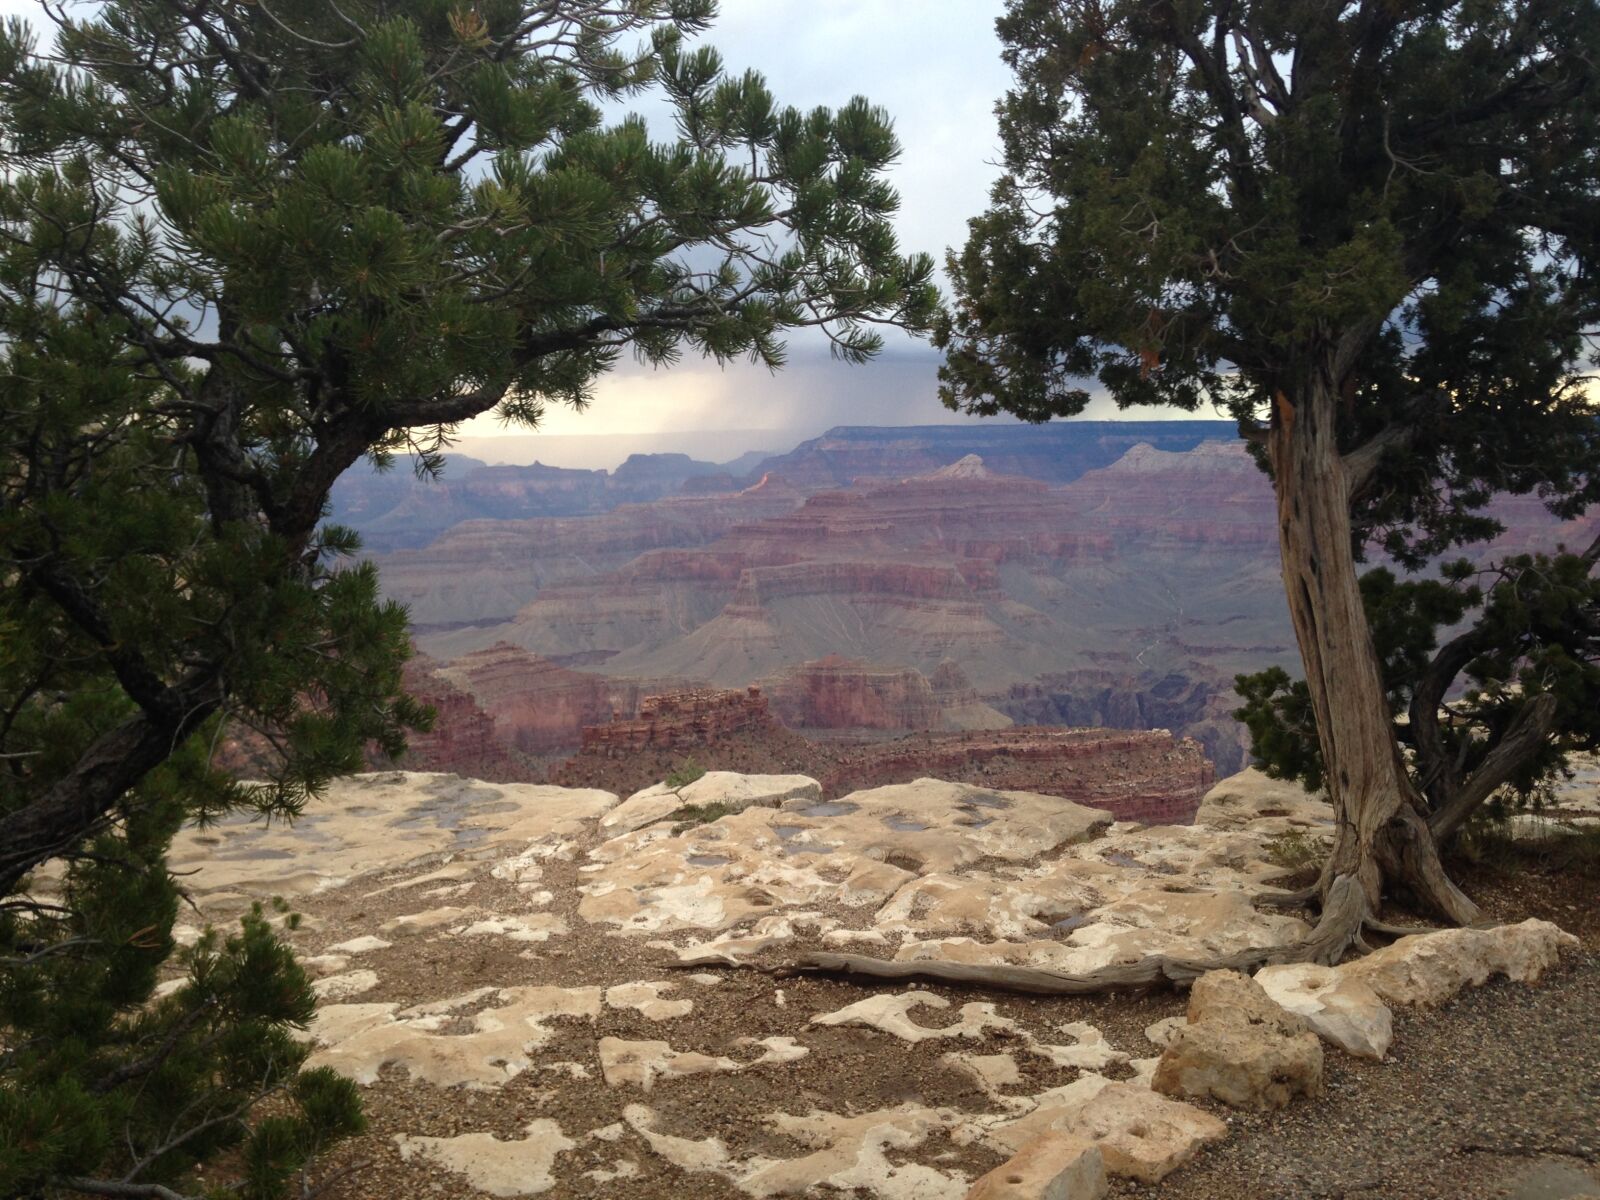 Apple iPhone 5c sample photo. Grand canyon, clouds, mountain photography